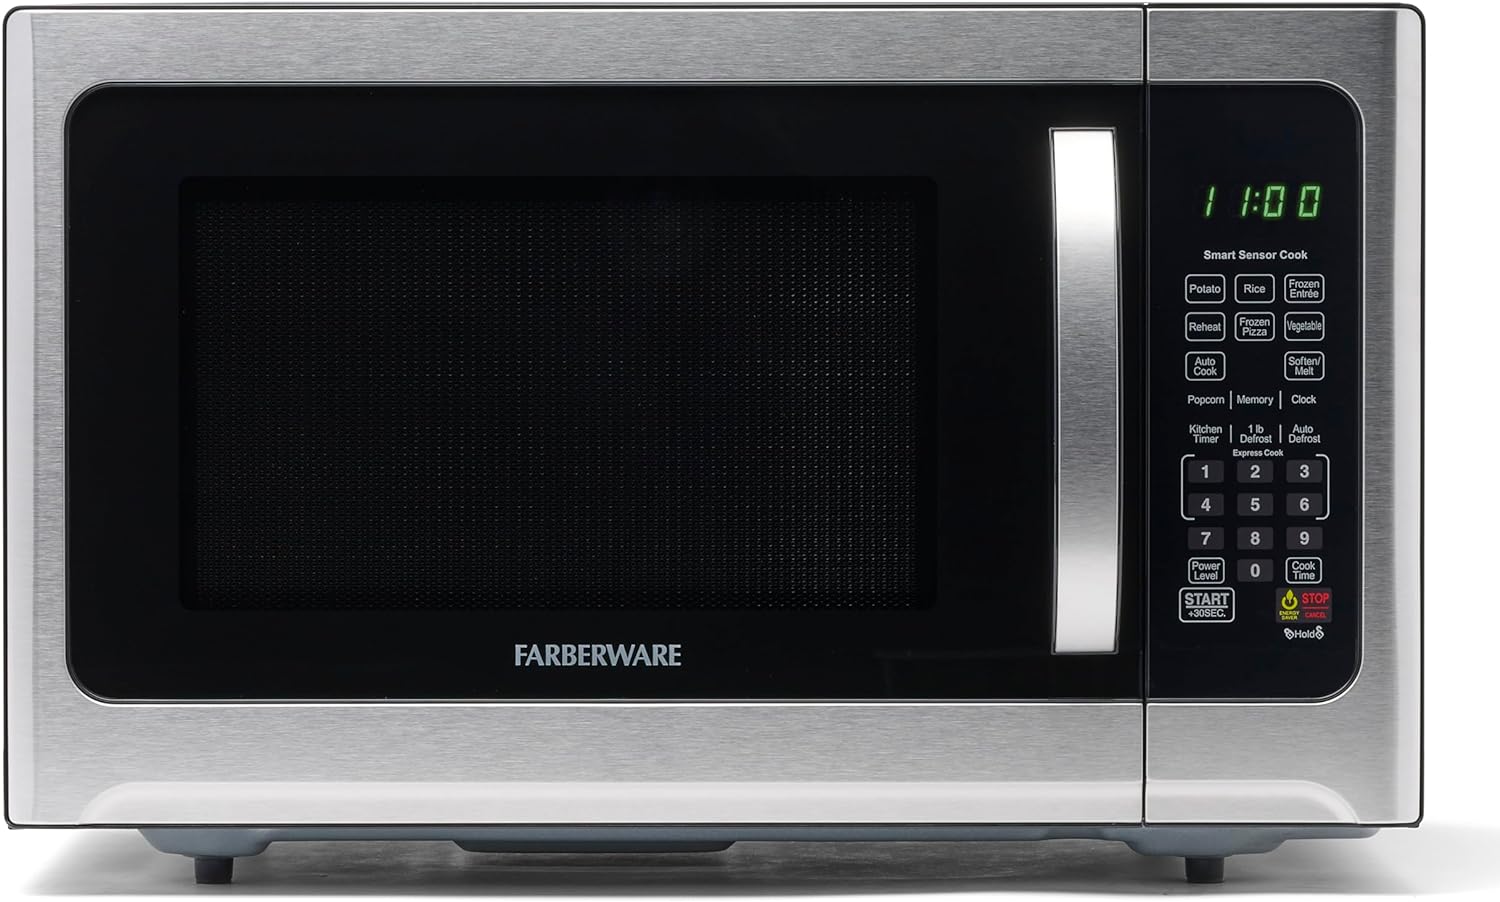 the Farberware Countertop Microwave with 1100 Watts of power, and it has proven to be an efficient and reliable addition to my kitchen. Here' a comprehensive review based on my experience:Powerful Performance:The 1100 Watts of power packed into this Farberware Countertop Microwave ensures rapid and efficient cooking. Whether reheating leftovers, cooking frozen meals, or preparing quick snacks, the microwave' high wattage significantly reduces cooking time, making it a time-saving appliance.Spa